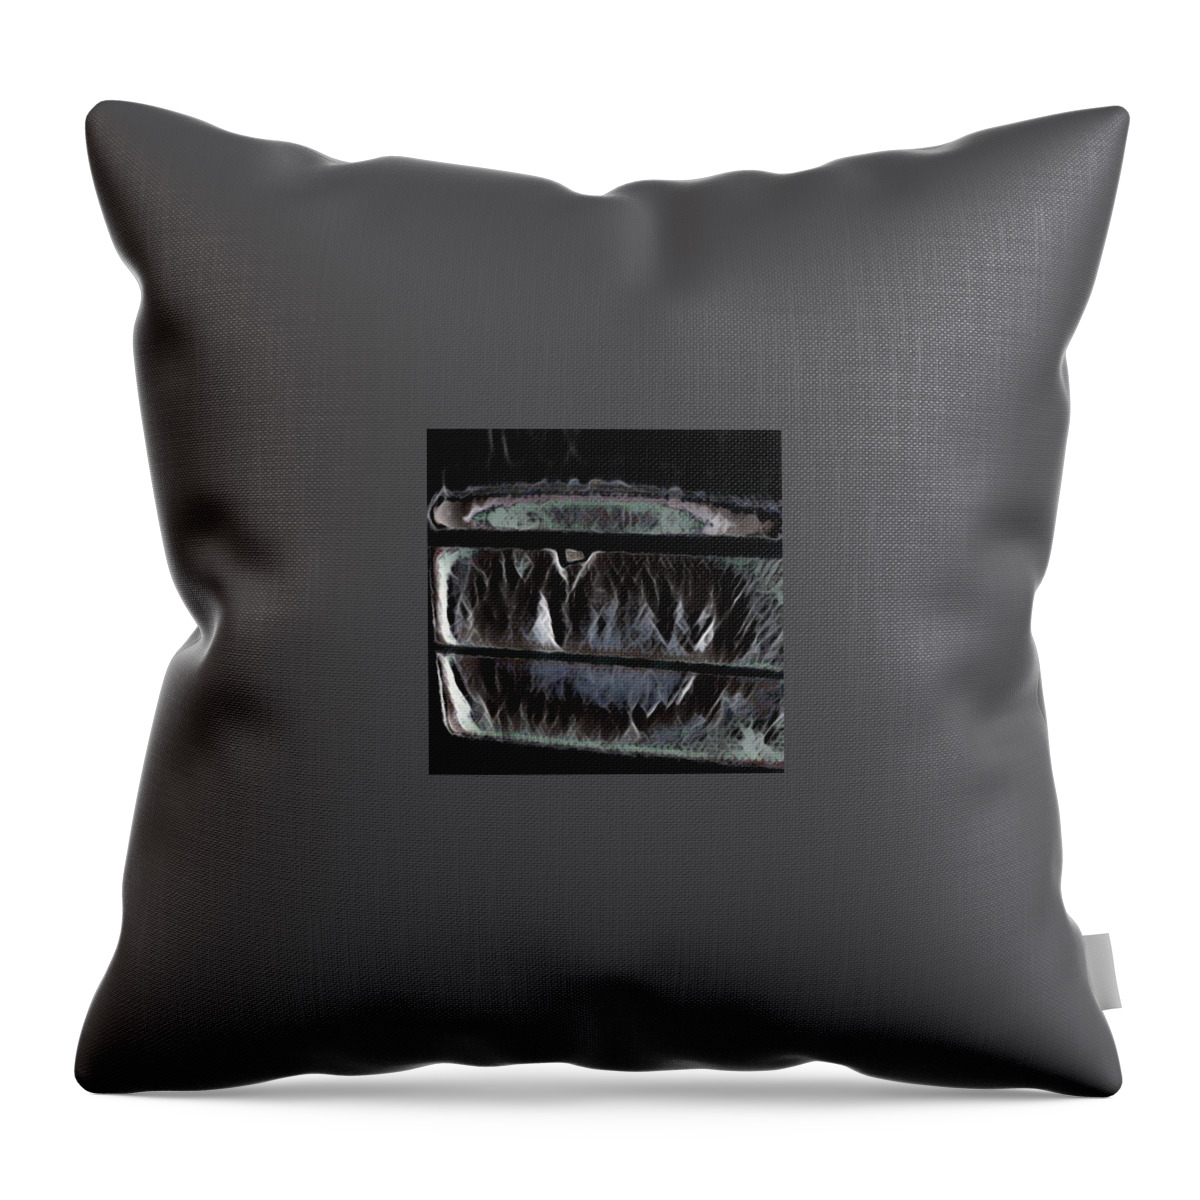 A Cold Winter Night With Frozen Ice On My Window Pane Throw Pillow featuring the photograph A cold winter night with frozen ice on my window pane by Brenae Cochran